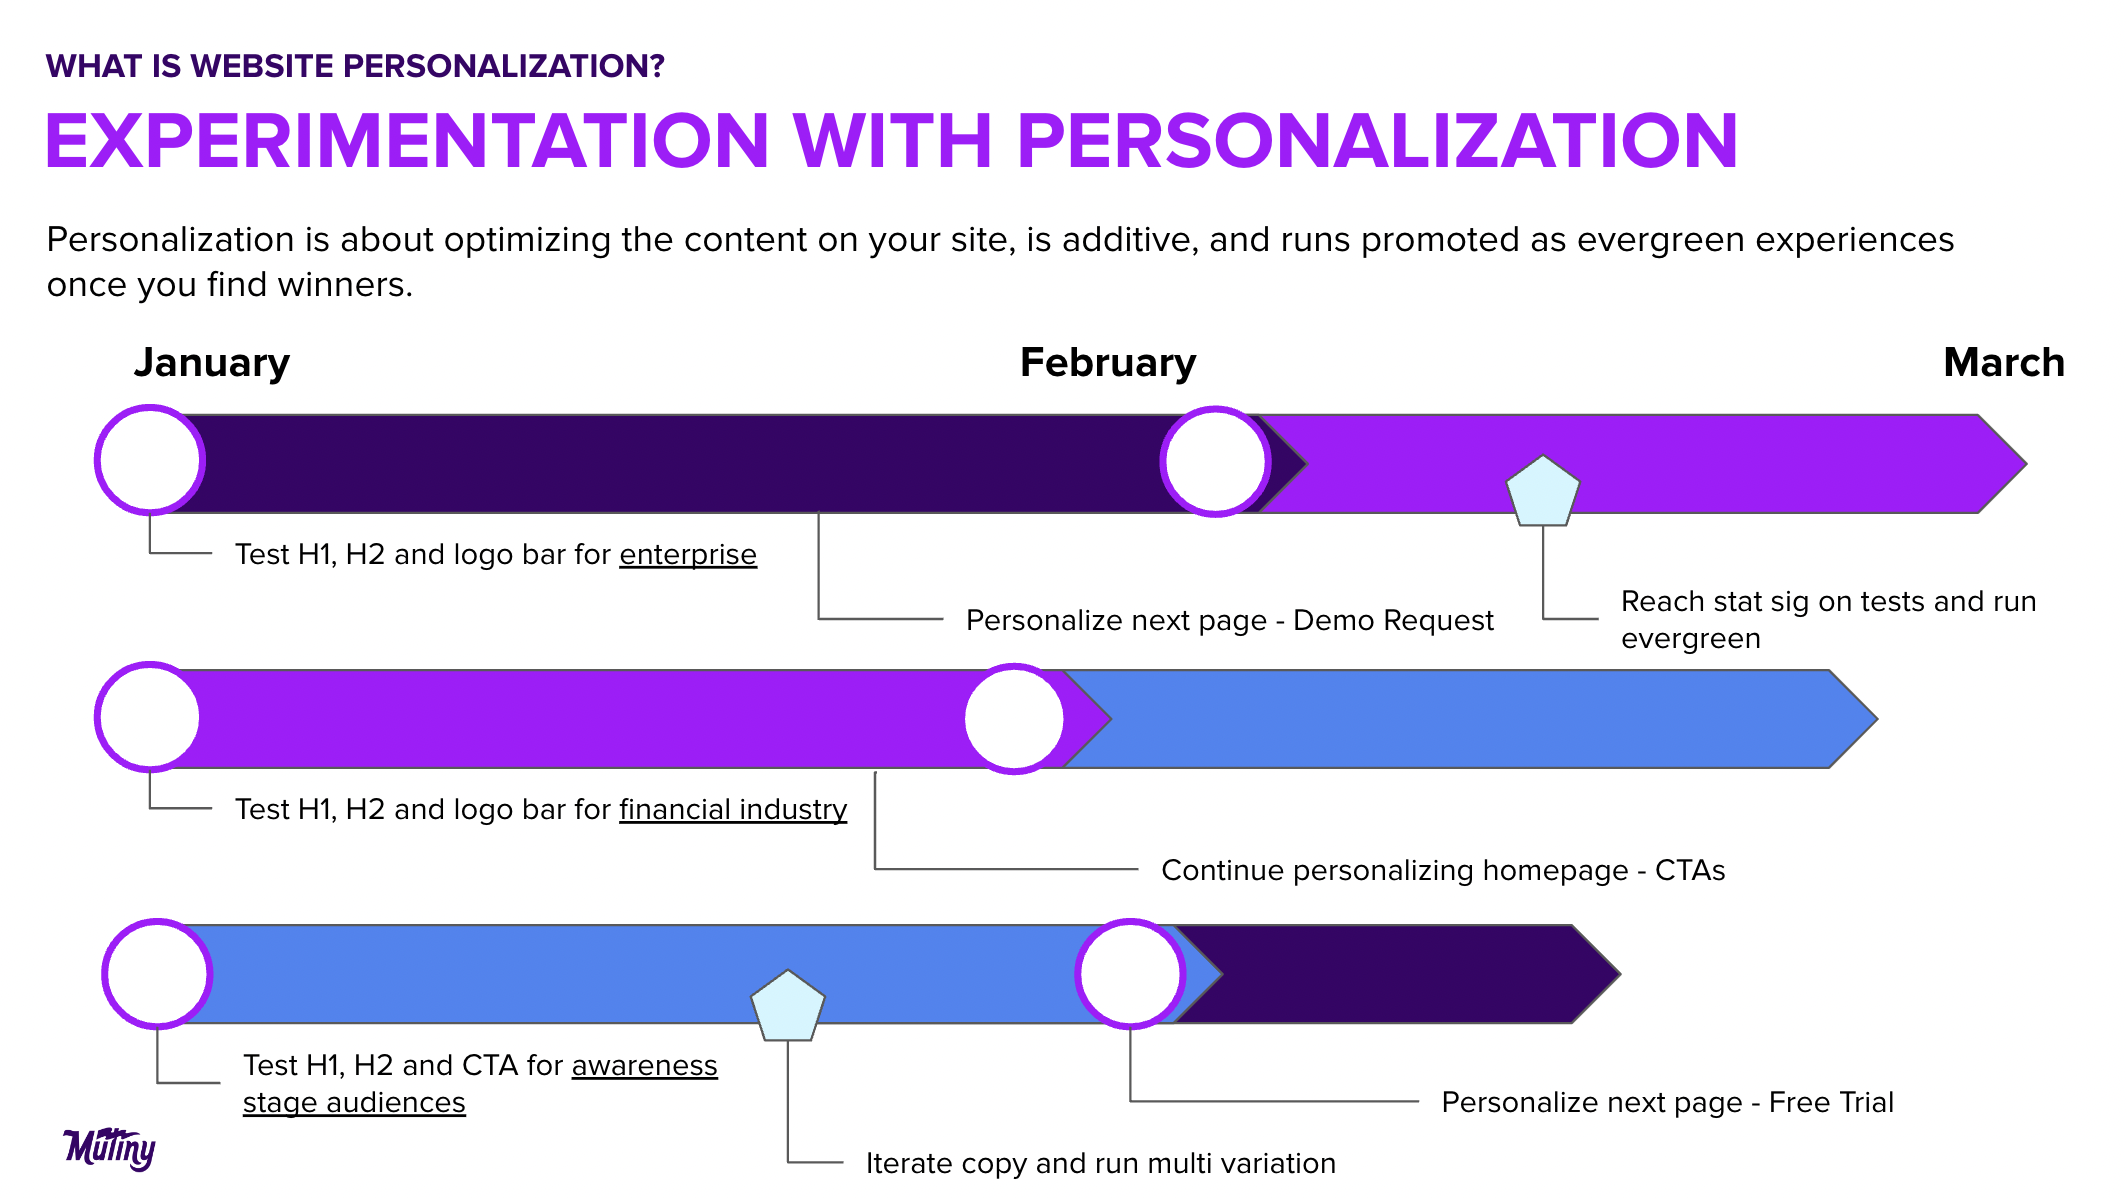 Personalization is a parallel method of testing